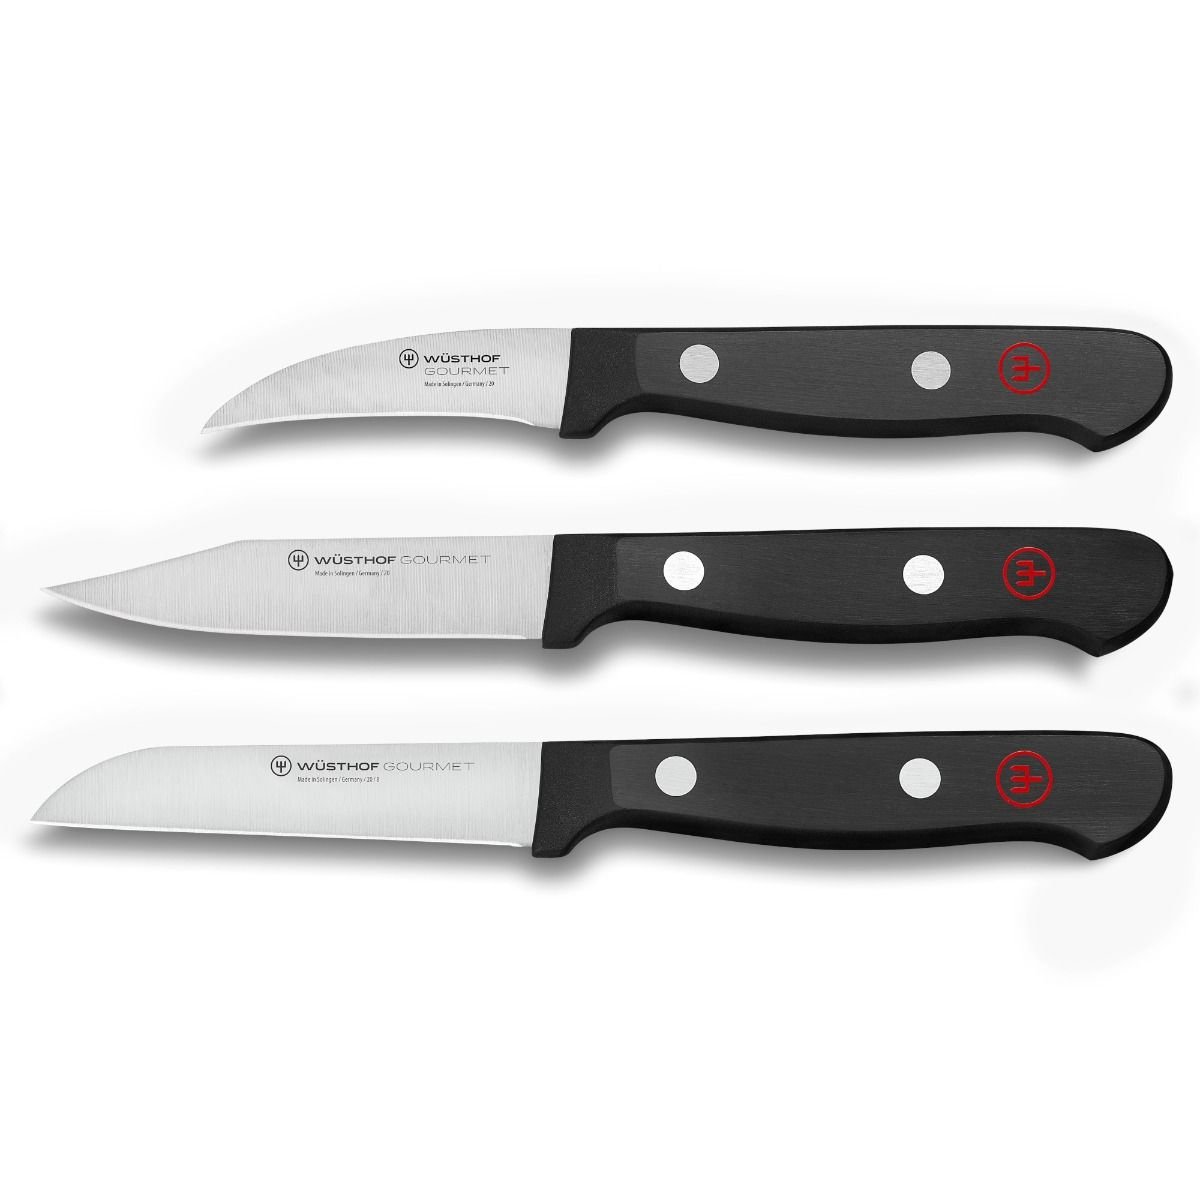 Choice 3 1/4 Paring Knife Set with 1 Serrated and 2 Smooth Edge Knives  with White Handles